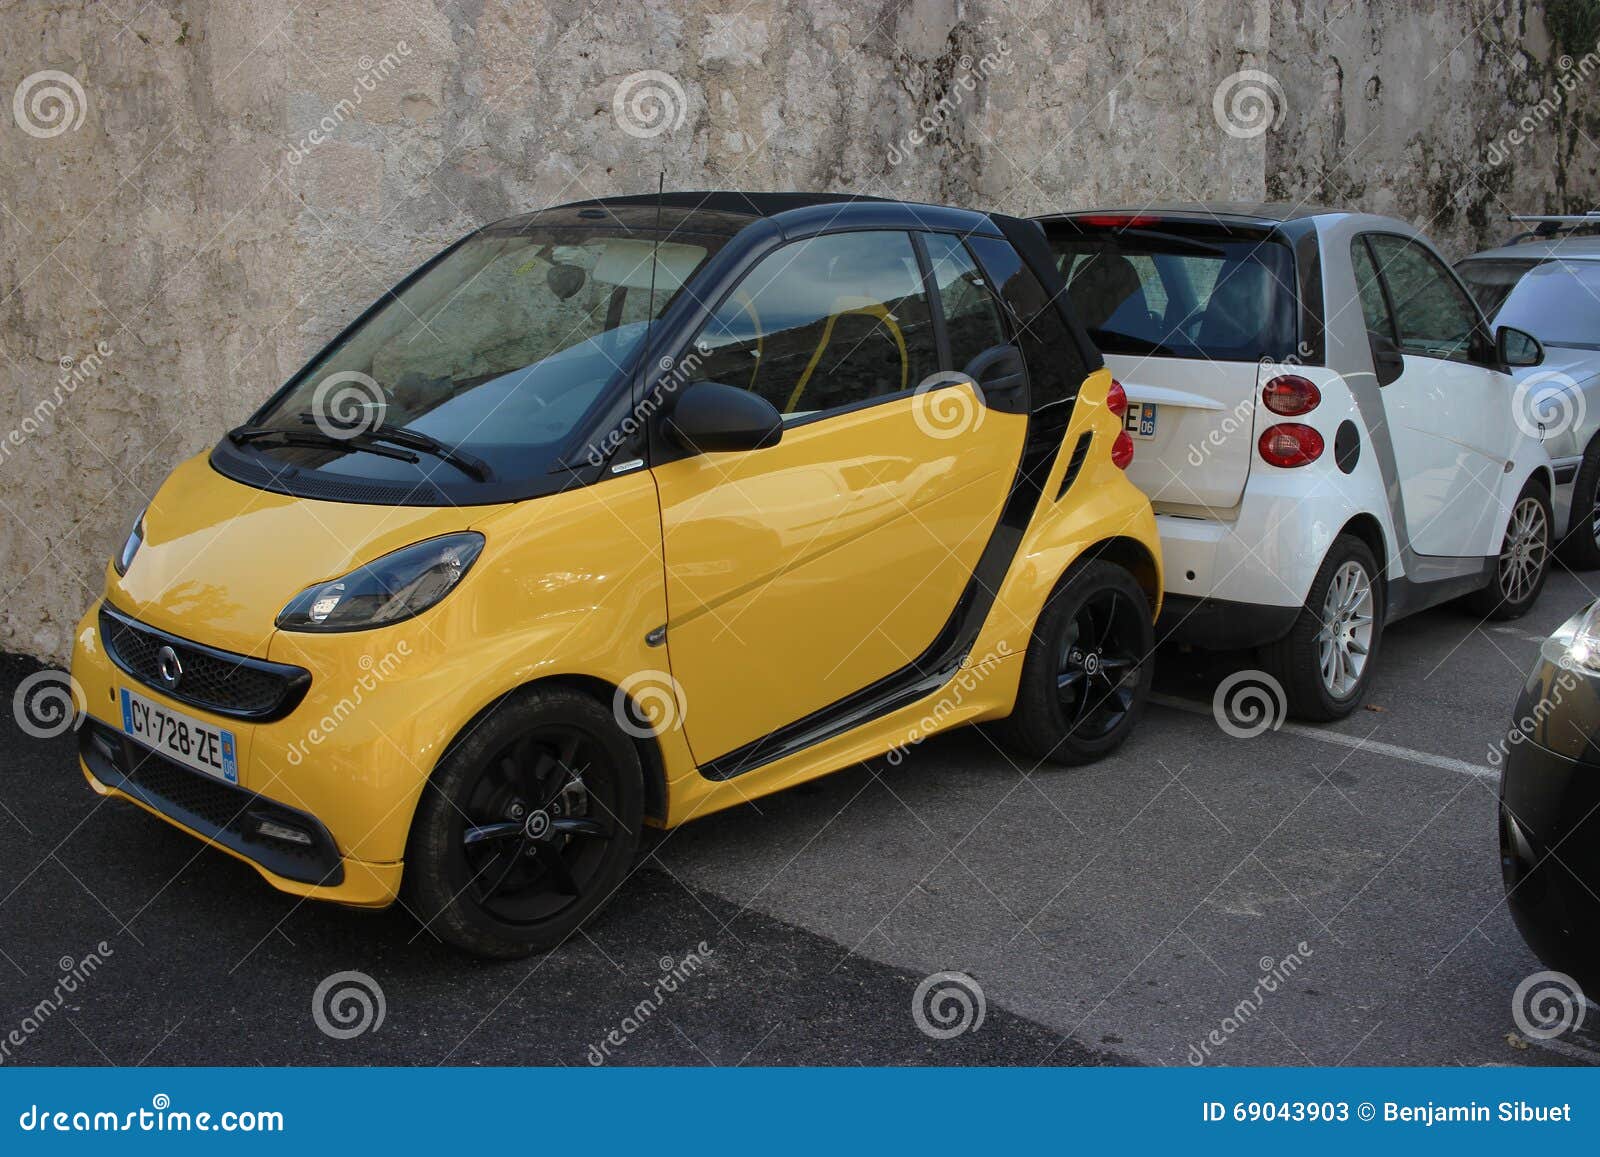 Smart ForTwo Cabrio (Model 451) vector drawing